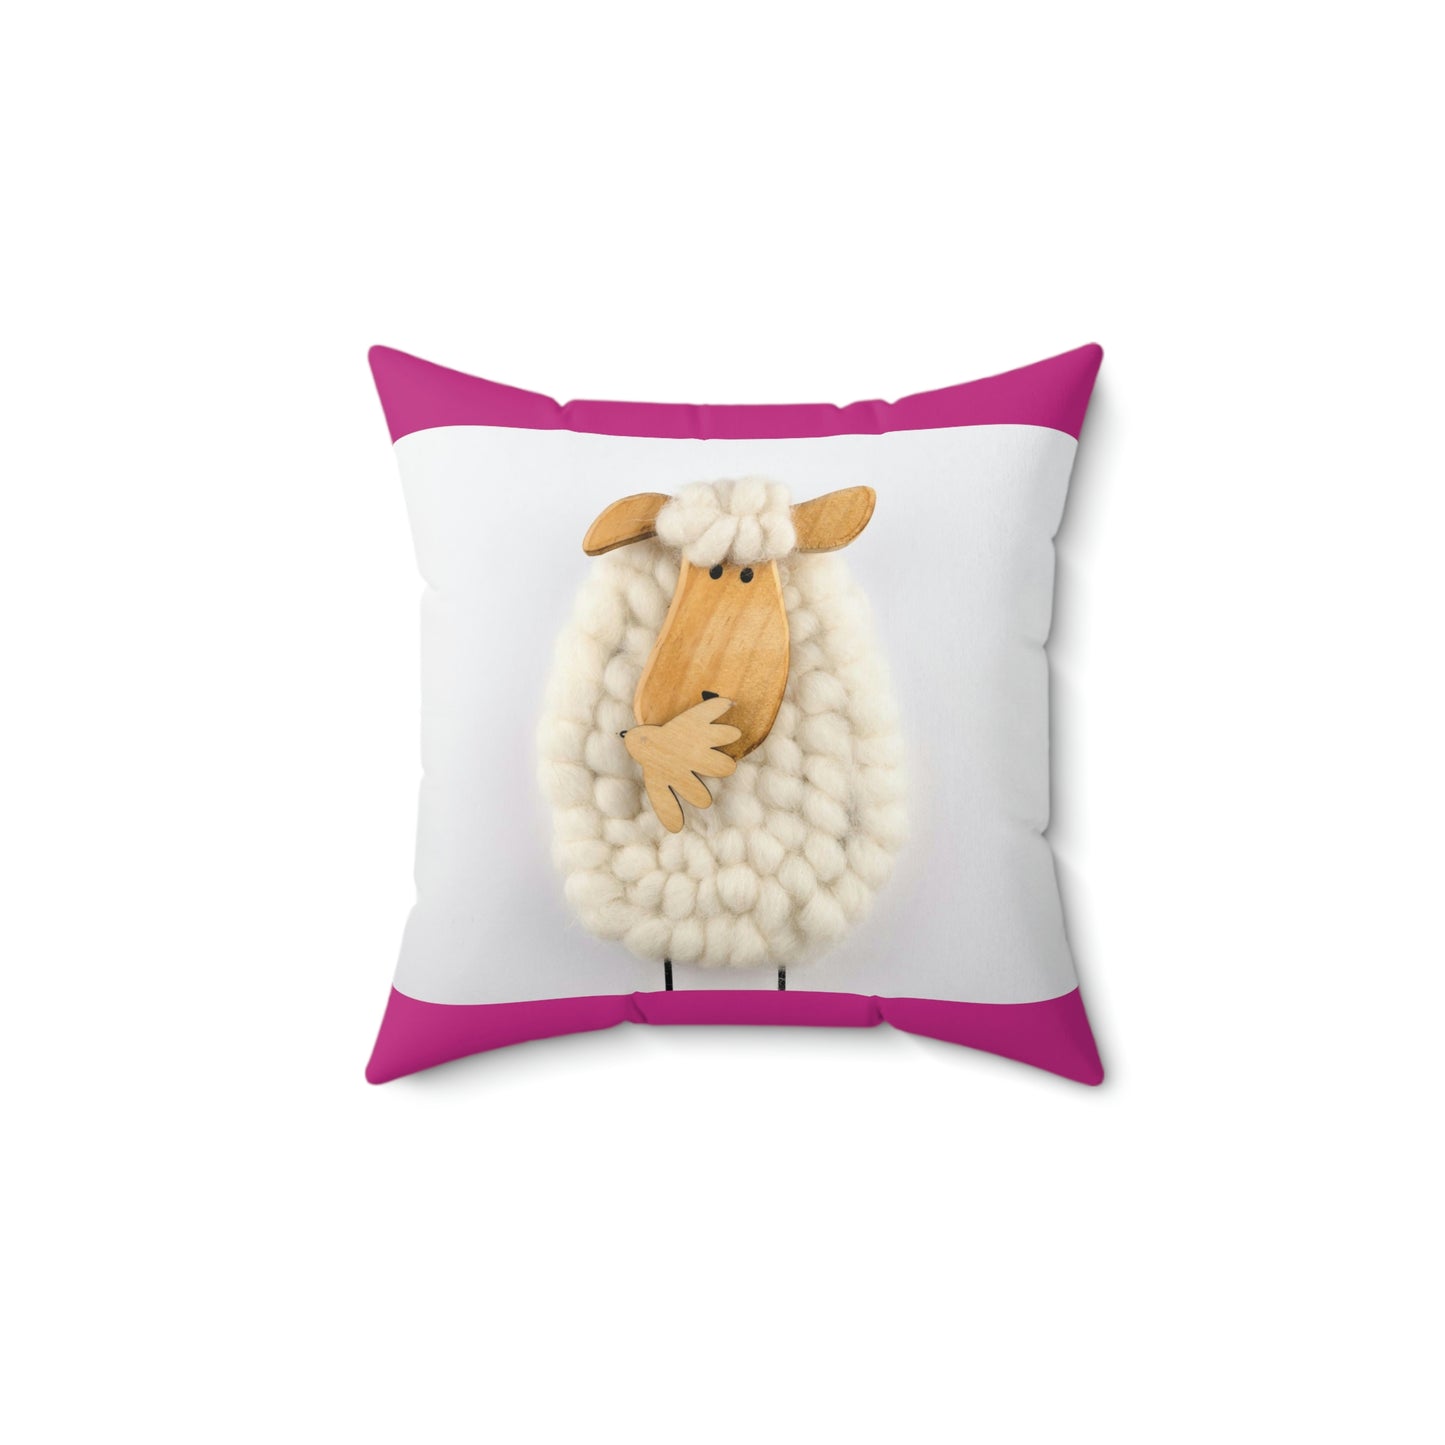 Sheep Pillow Case - Hot Pink and White Colors - Faux Suede Square Pillow Case